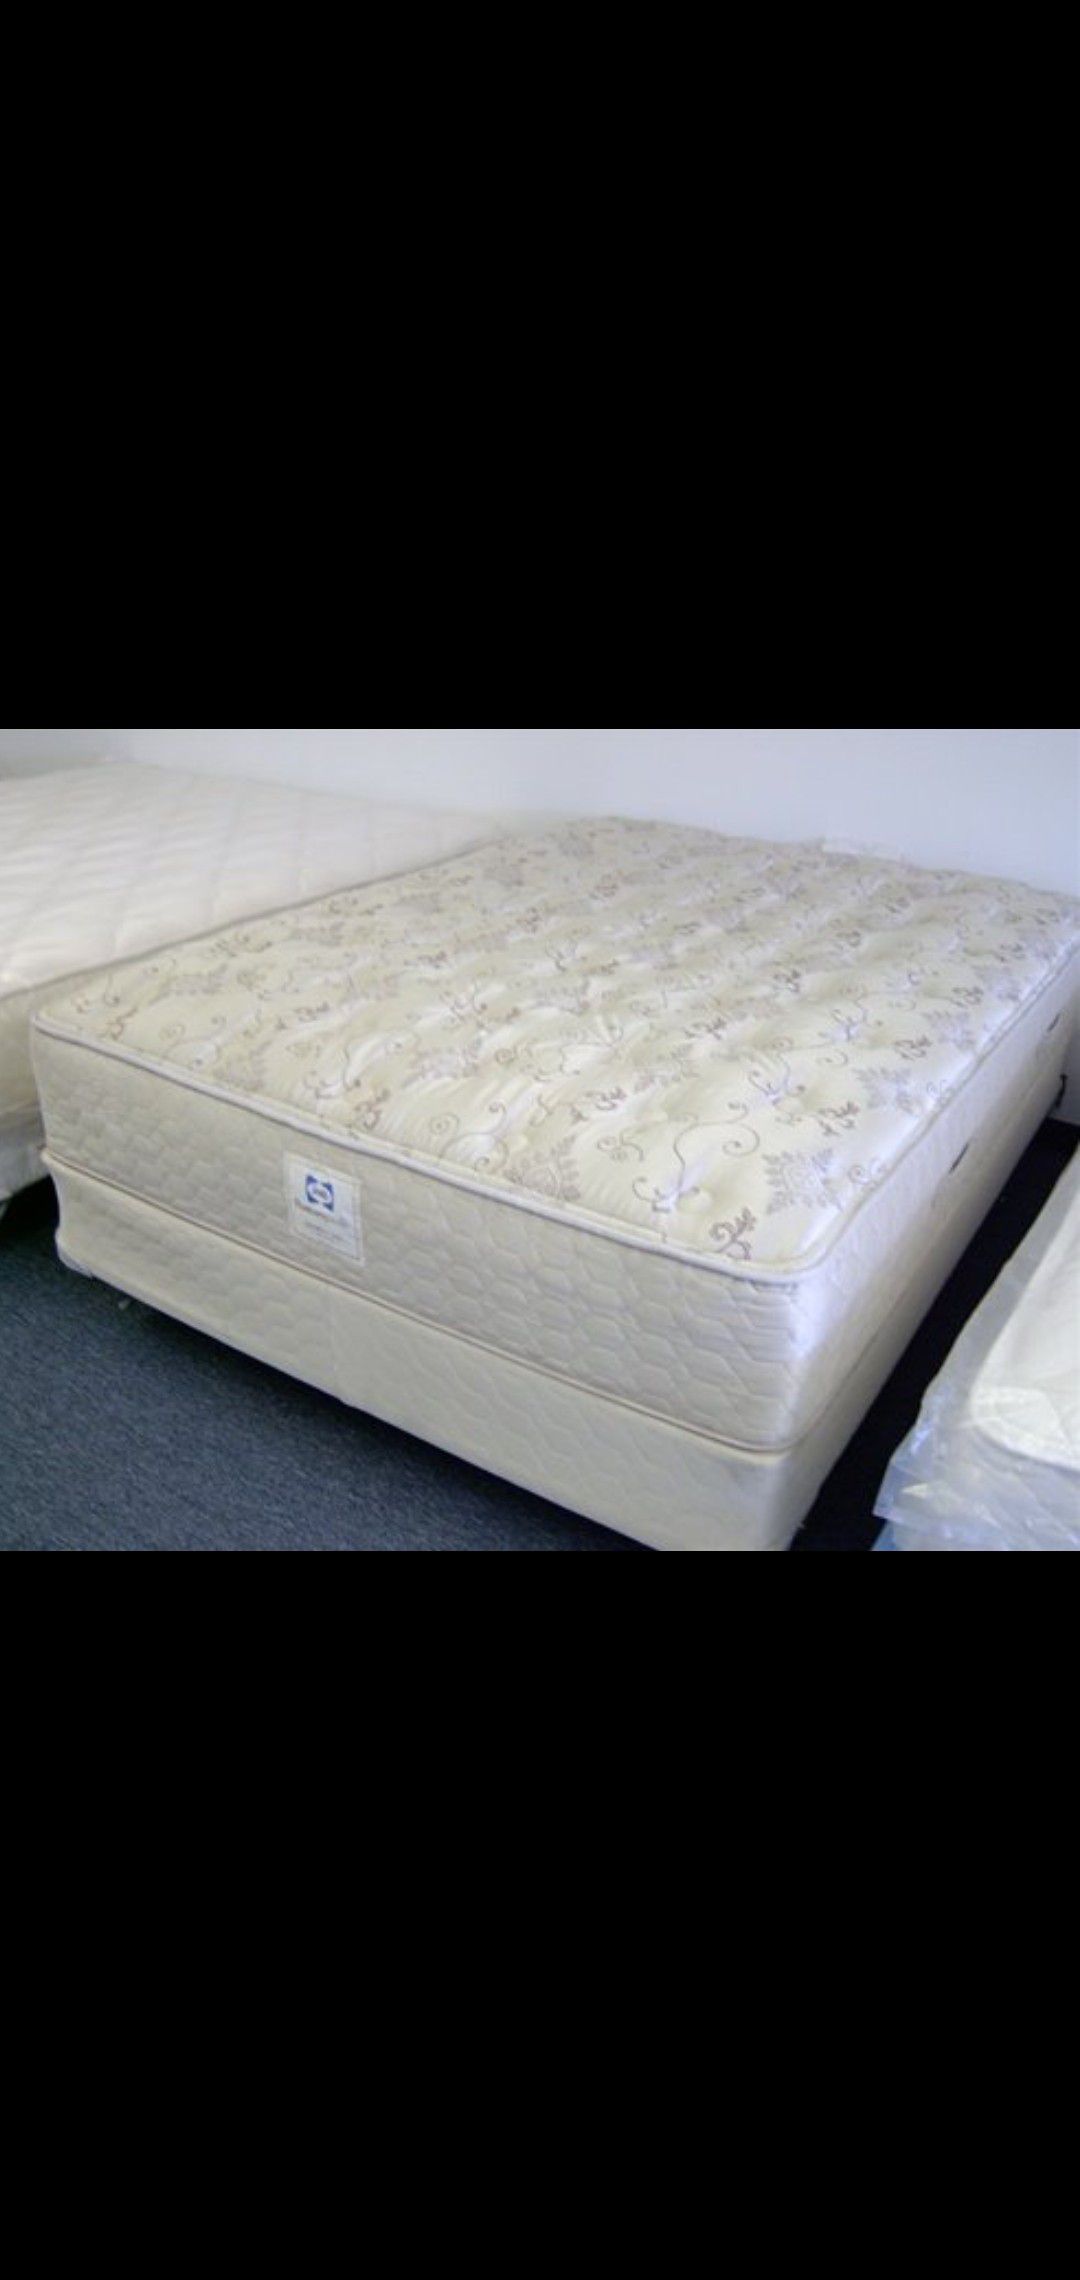 Great Queen Sealy Posturepedic Mattress, Matching Boxspring, Metal Bed Frame and Free Wood Headboard